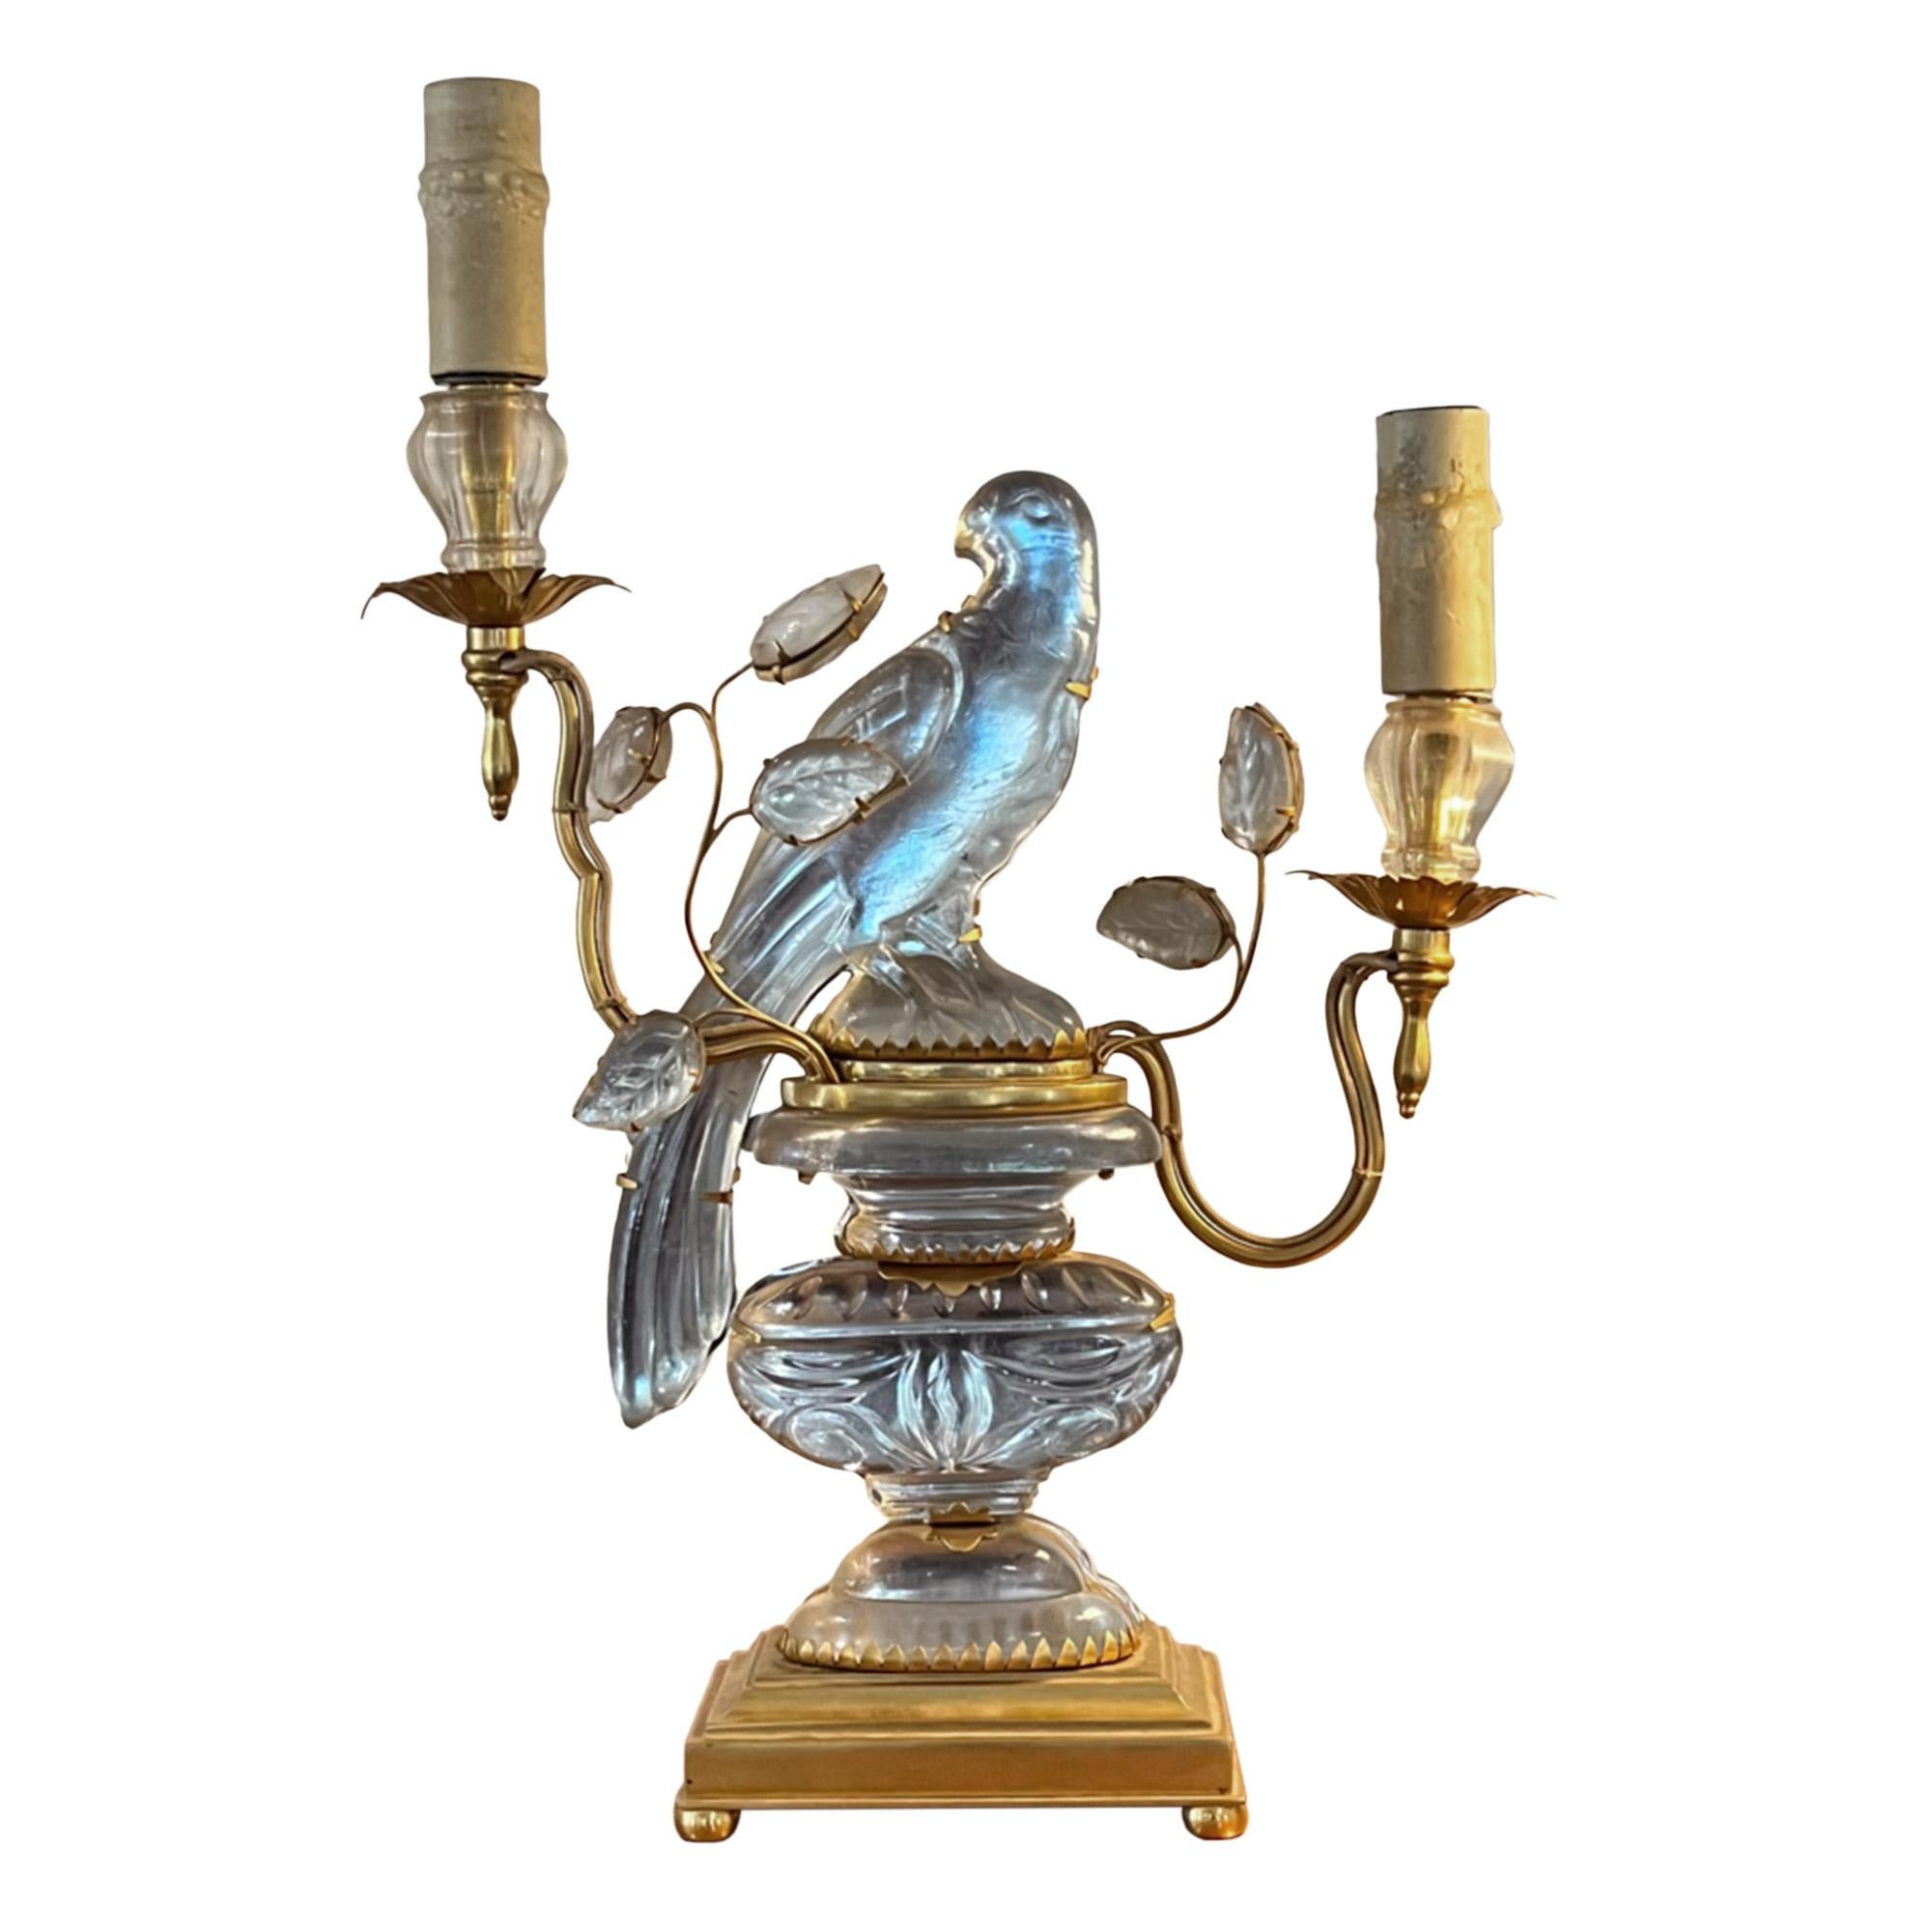 This gorgeous Maison Baguès table lamp was made in Paris, France in the 1960s. With it's iconic parrot and urn design - which is double sided - it's an exceptional light. 

The height to the top of the higher 'candle' is 40cm, to the top of the